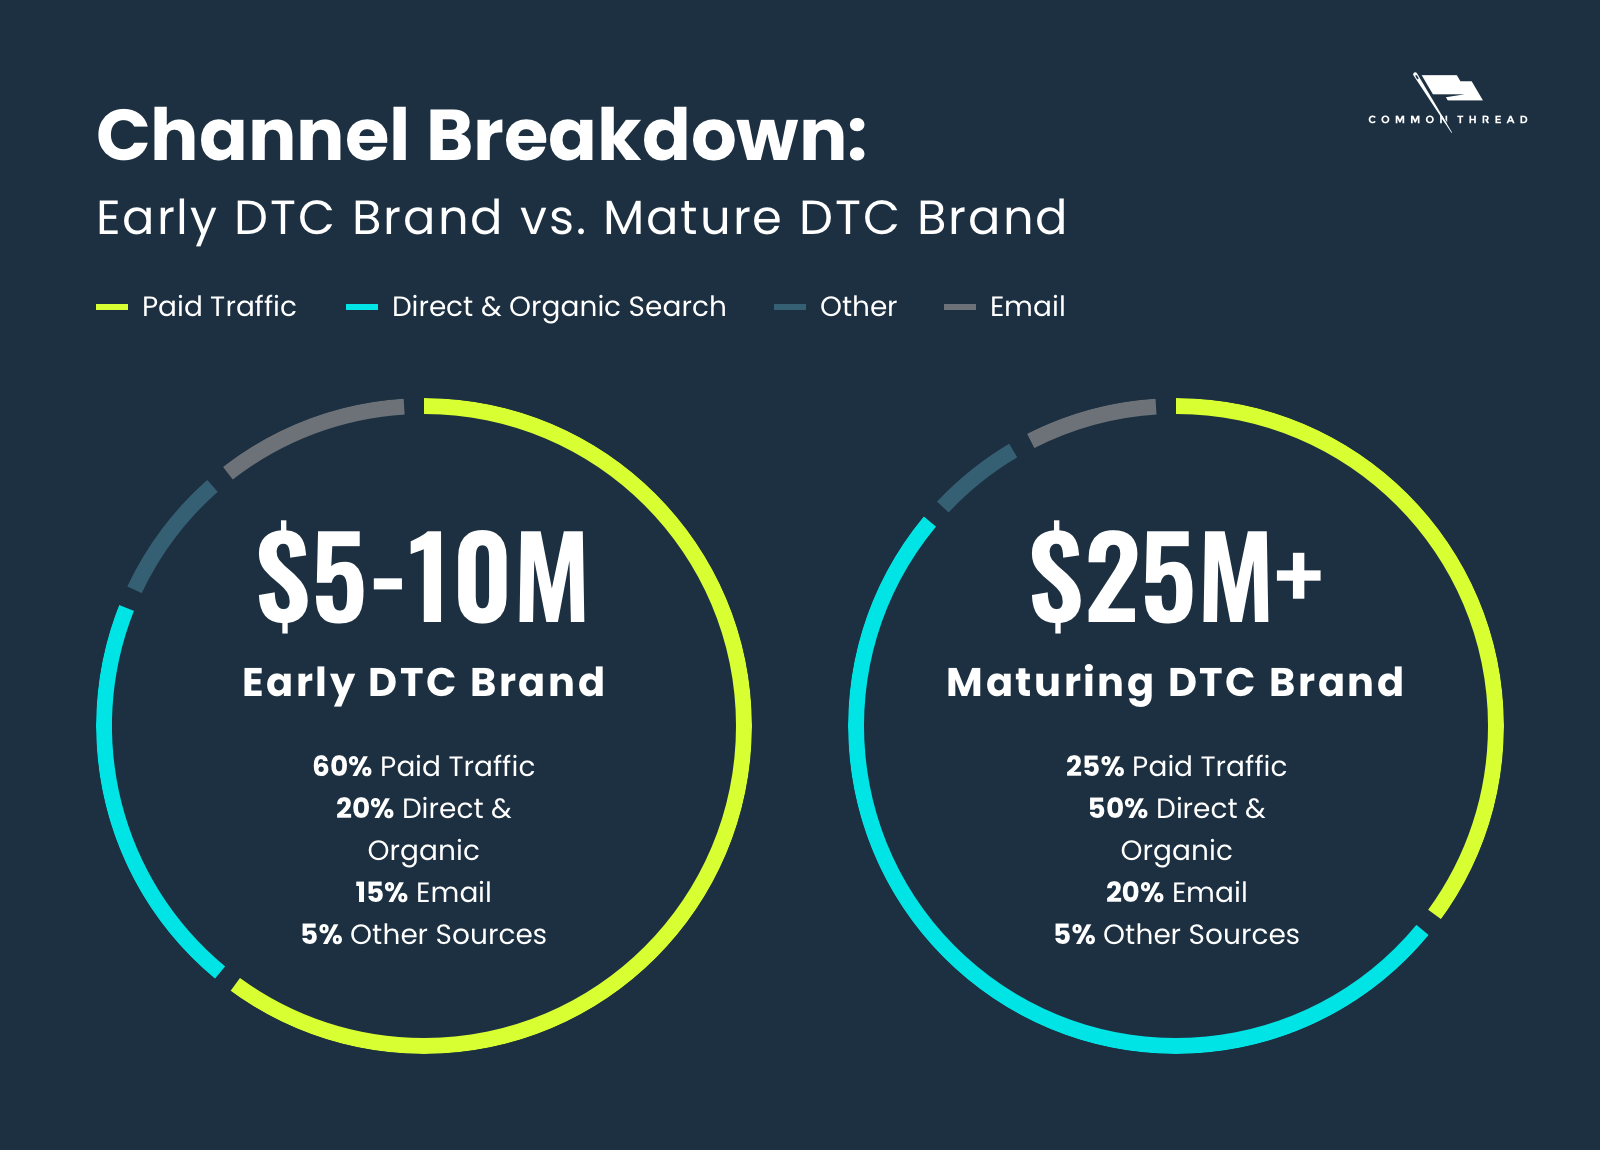 Step 1 of your ecommerce digital marketing plan: benchmark your overall channel attribution. Channel Breakdown: Early DTC Brand (60% Paid, 20% Direct & Organic, 15% Email, 5% Other Sources) vs. Maturing DTC Brand (25% Paid, 50% Direct & Organic, 20% Email, 5% Other Sources)